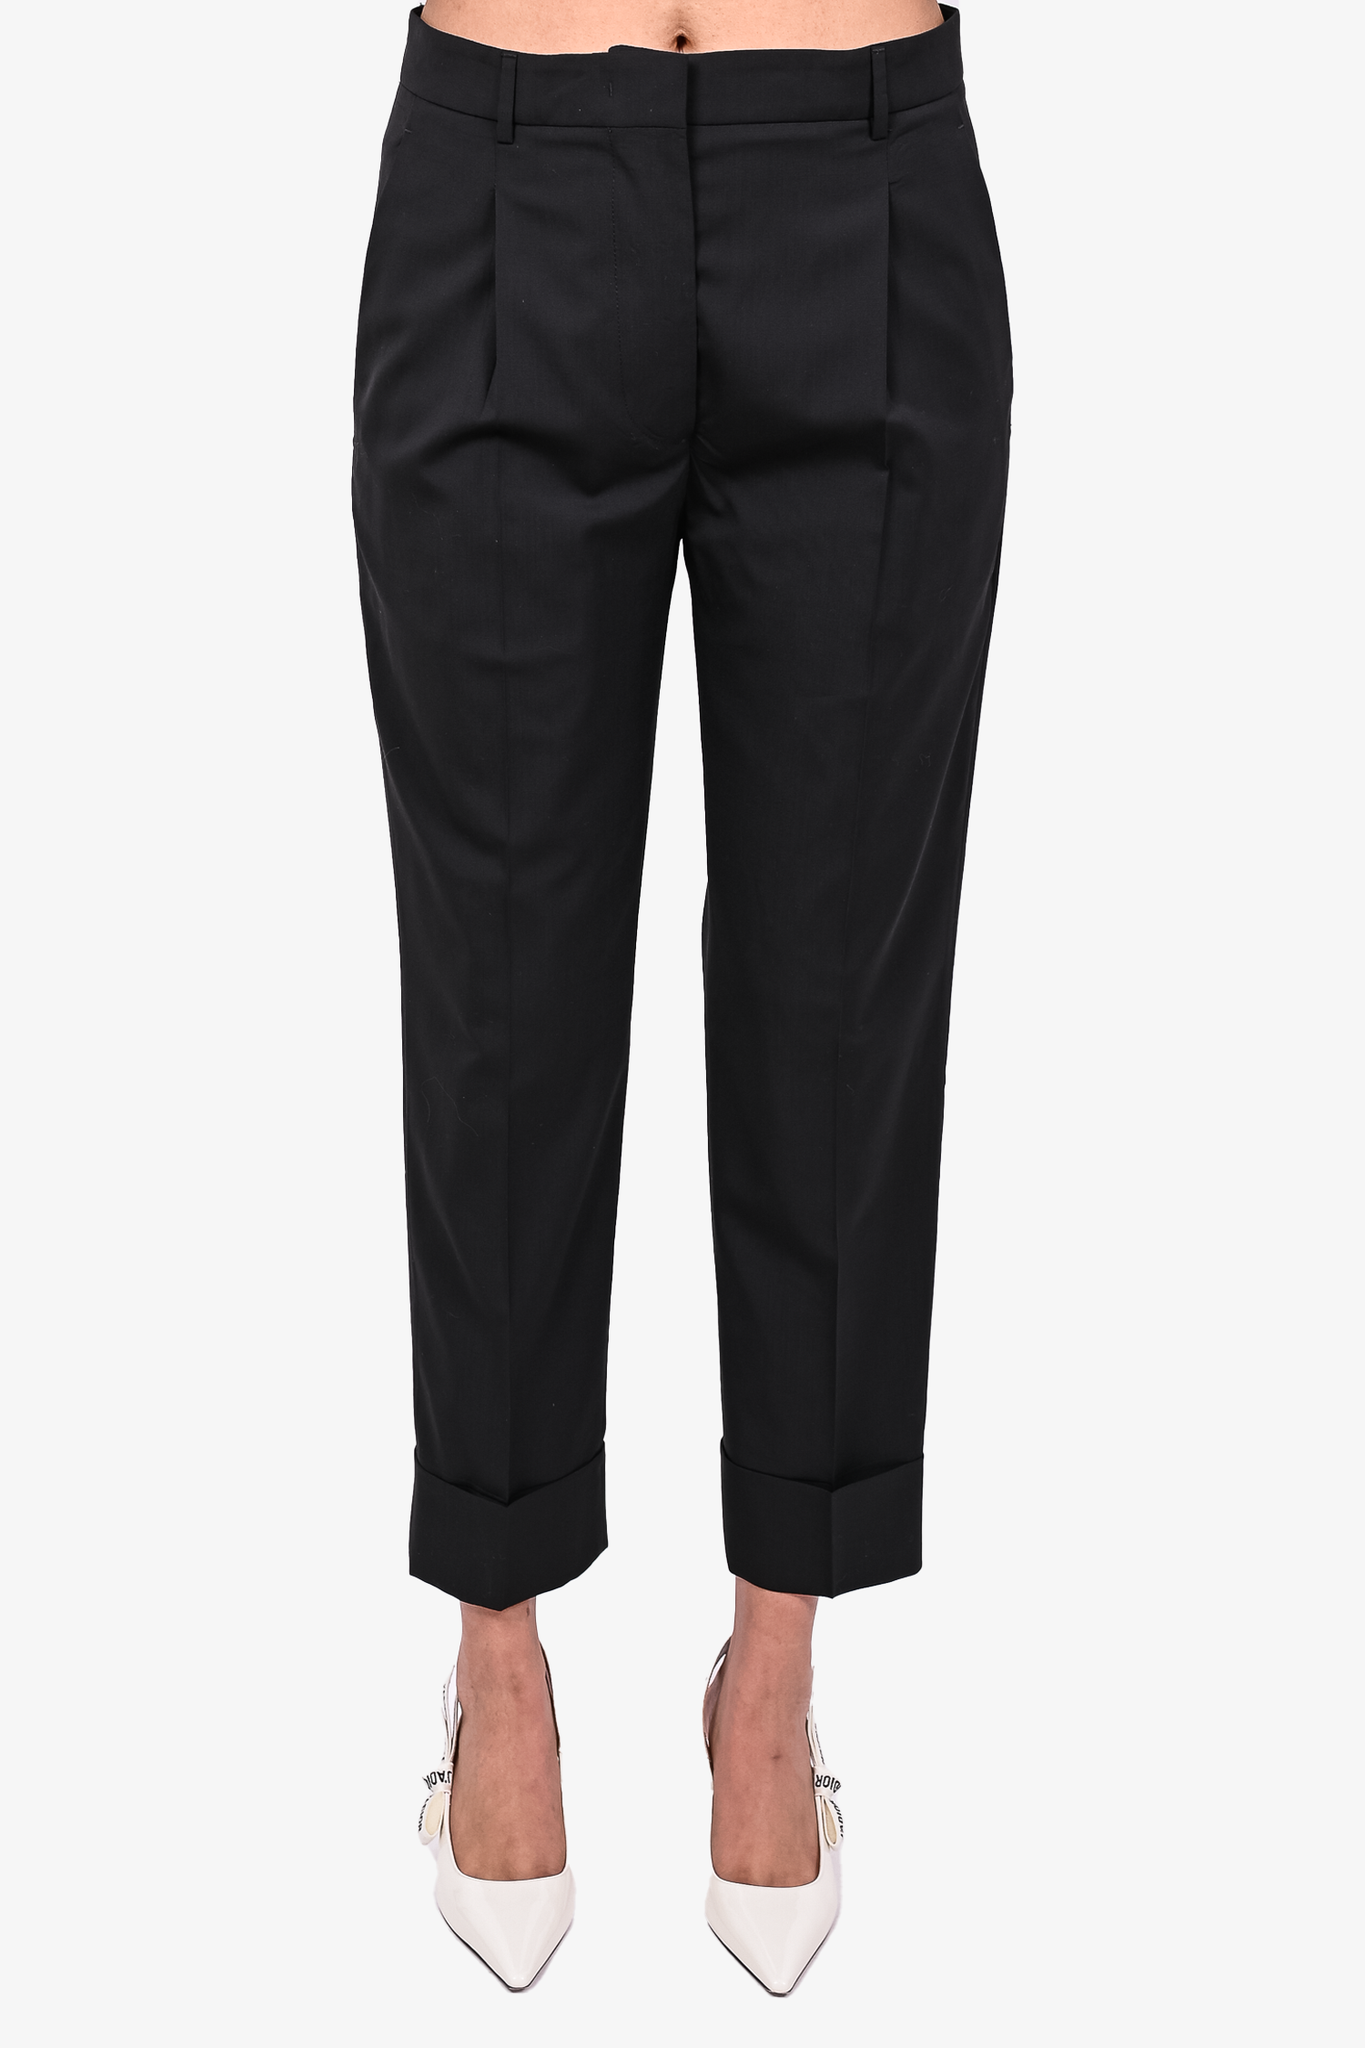 Martine Rose Rolled Waistband Tailored Trouser — SLOW WAVES